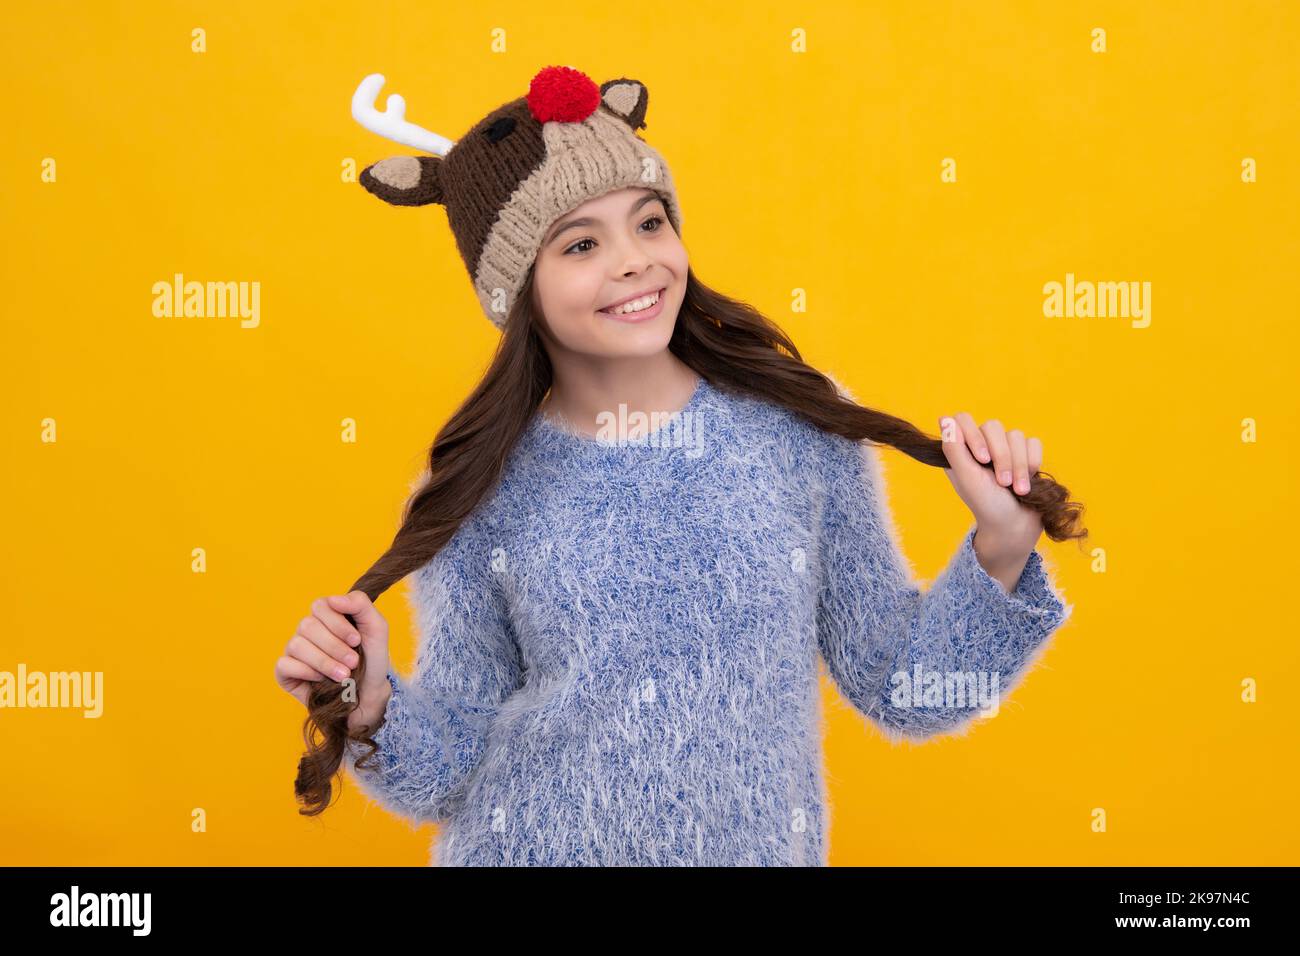 Modern teen girl wearing sweater and knitted hat on isolated yellow background. Happy girl face, positive and smiling emotions. Stock Photo